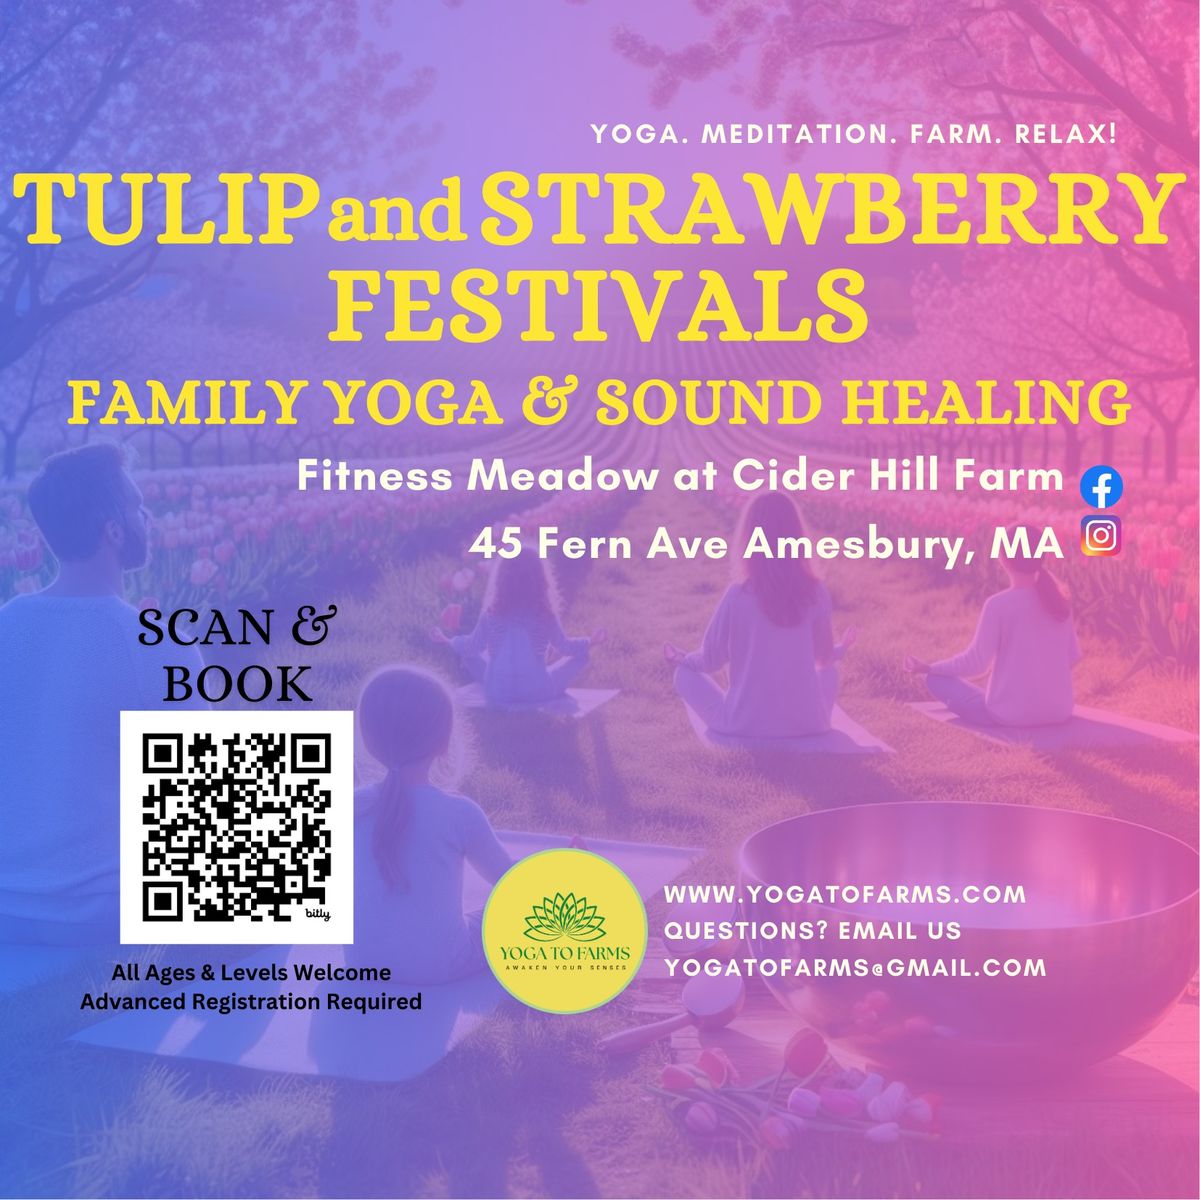 Tulip and Strawberry Festivals Family YOGA & Sound Healing (at Cider Hill Farm)